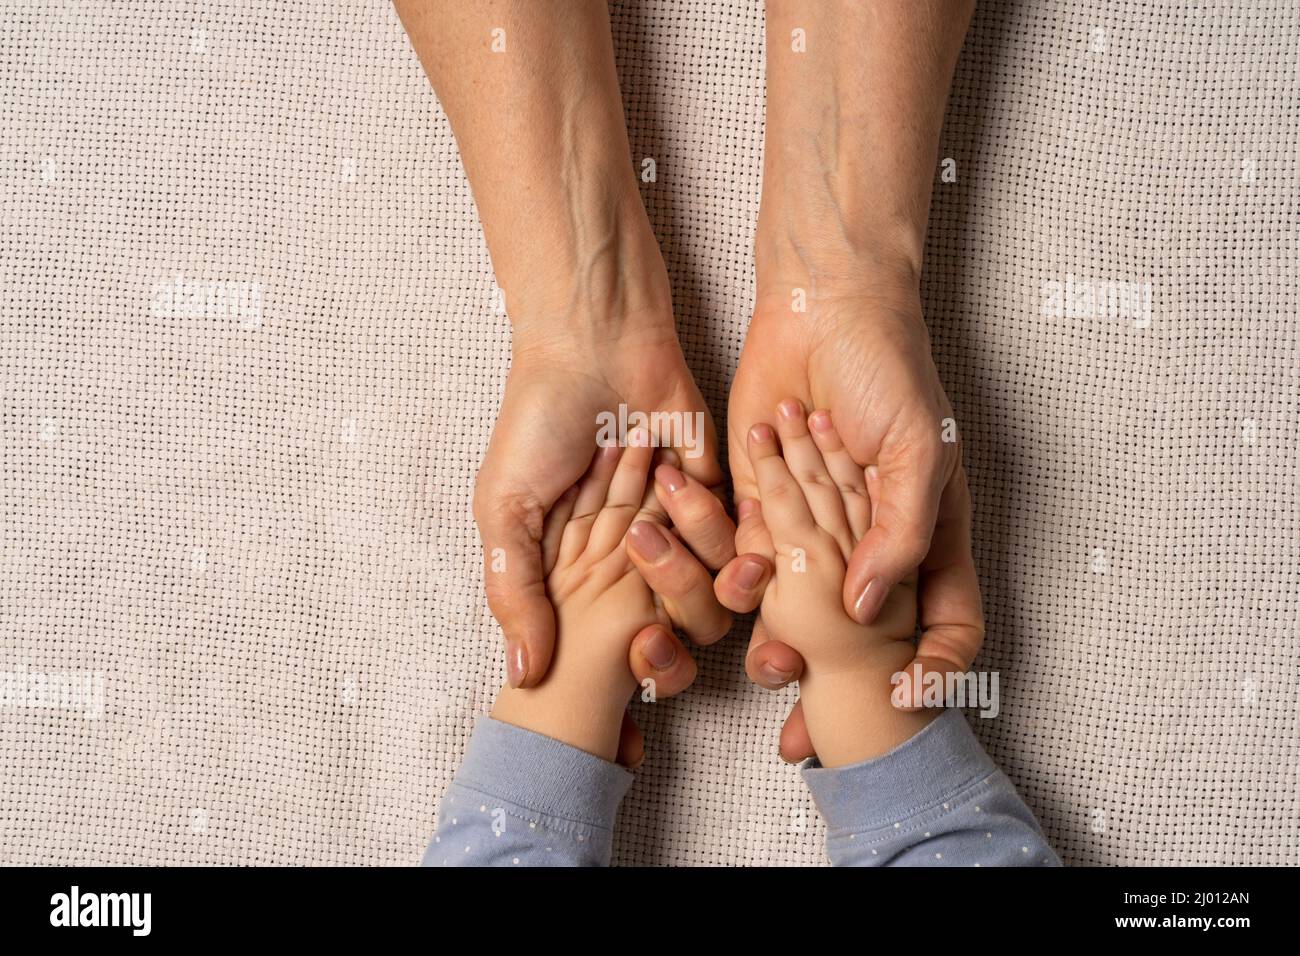 Grandma's hands are holding baby's hands. Concept taking care of the baby , soft skin, great-grandmother and great-grandson. Stock Photo